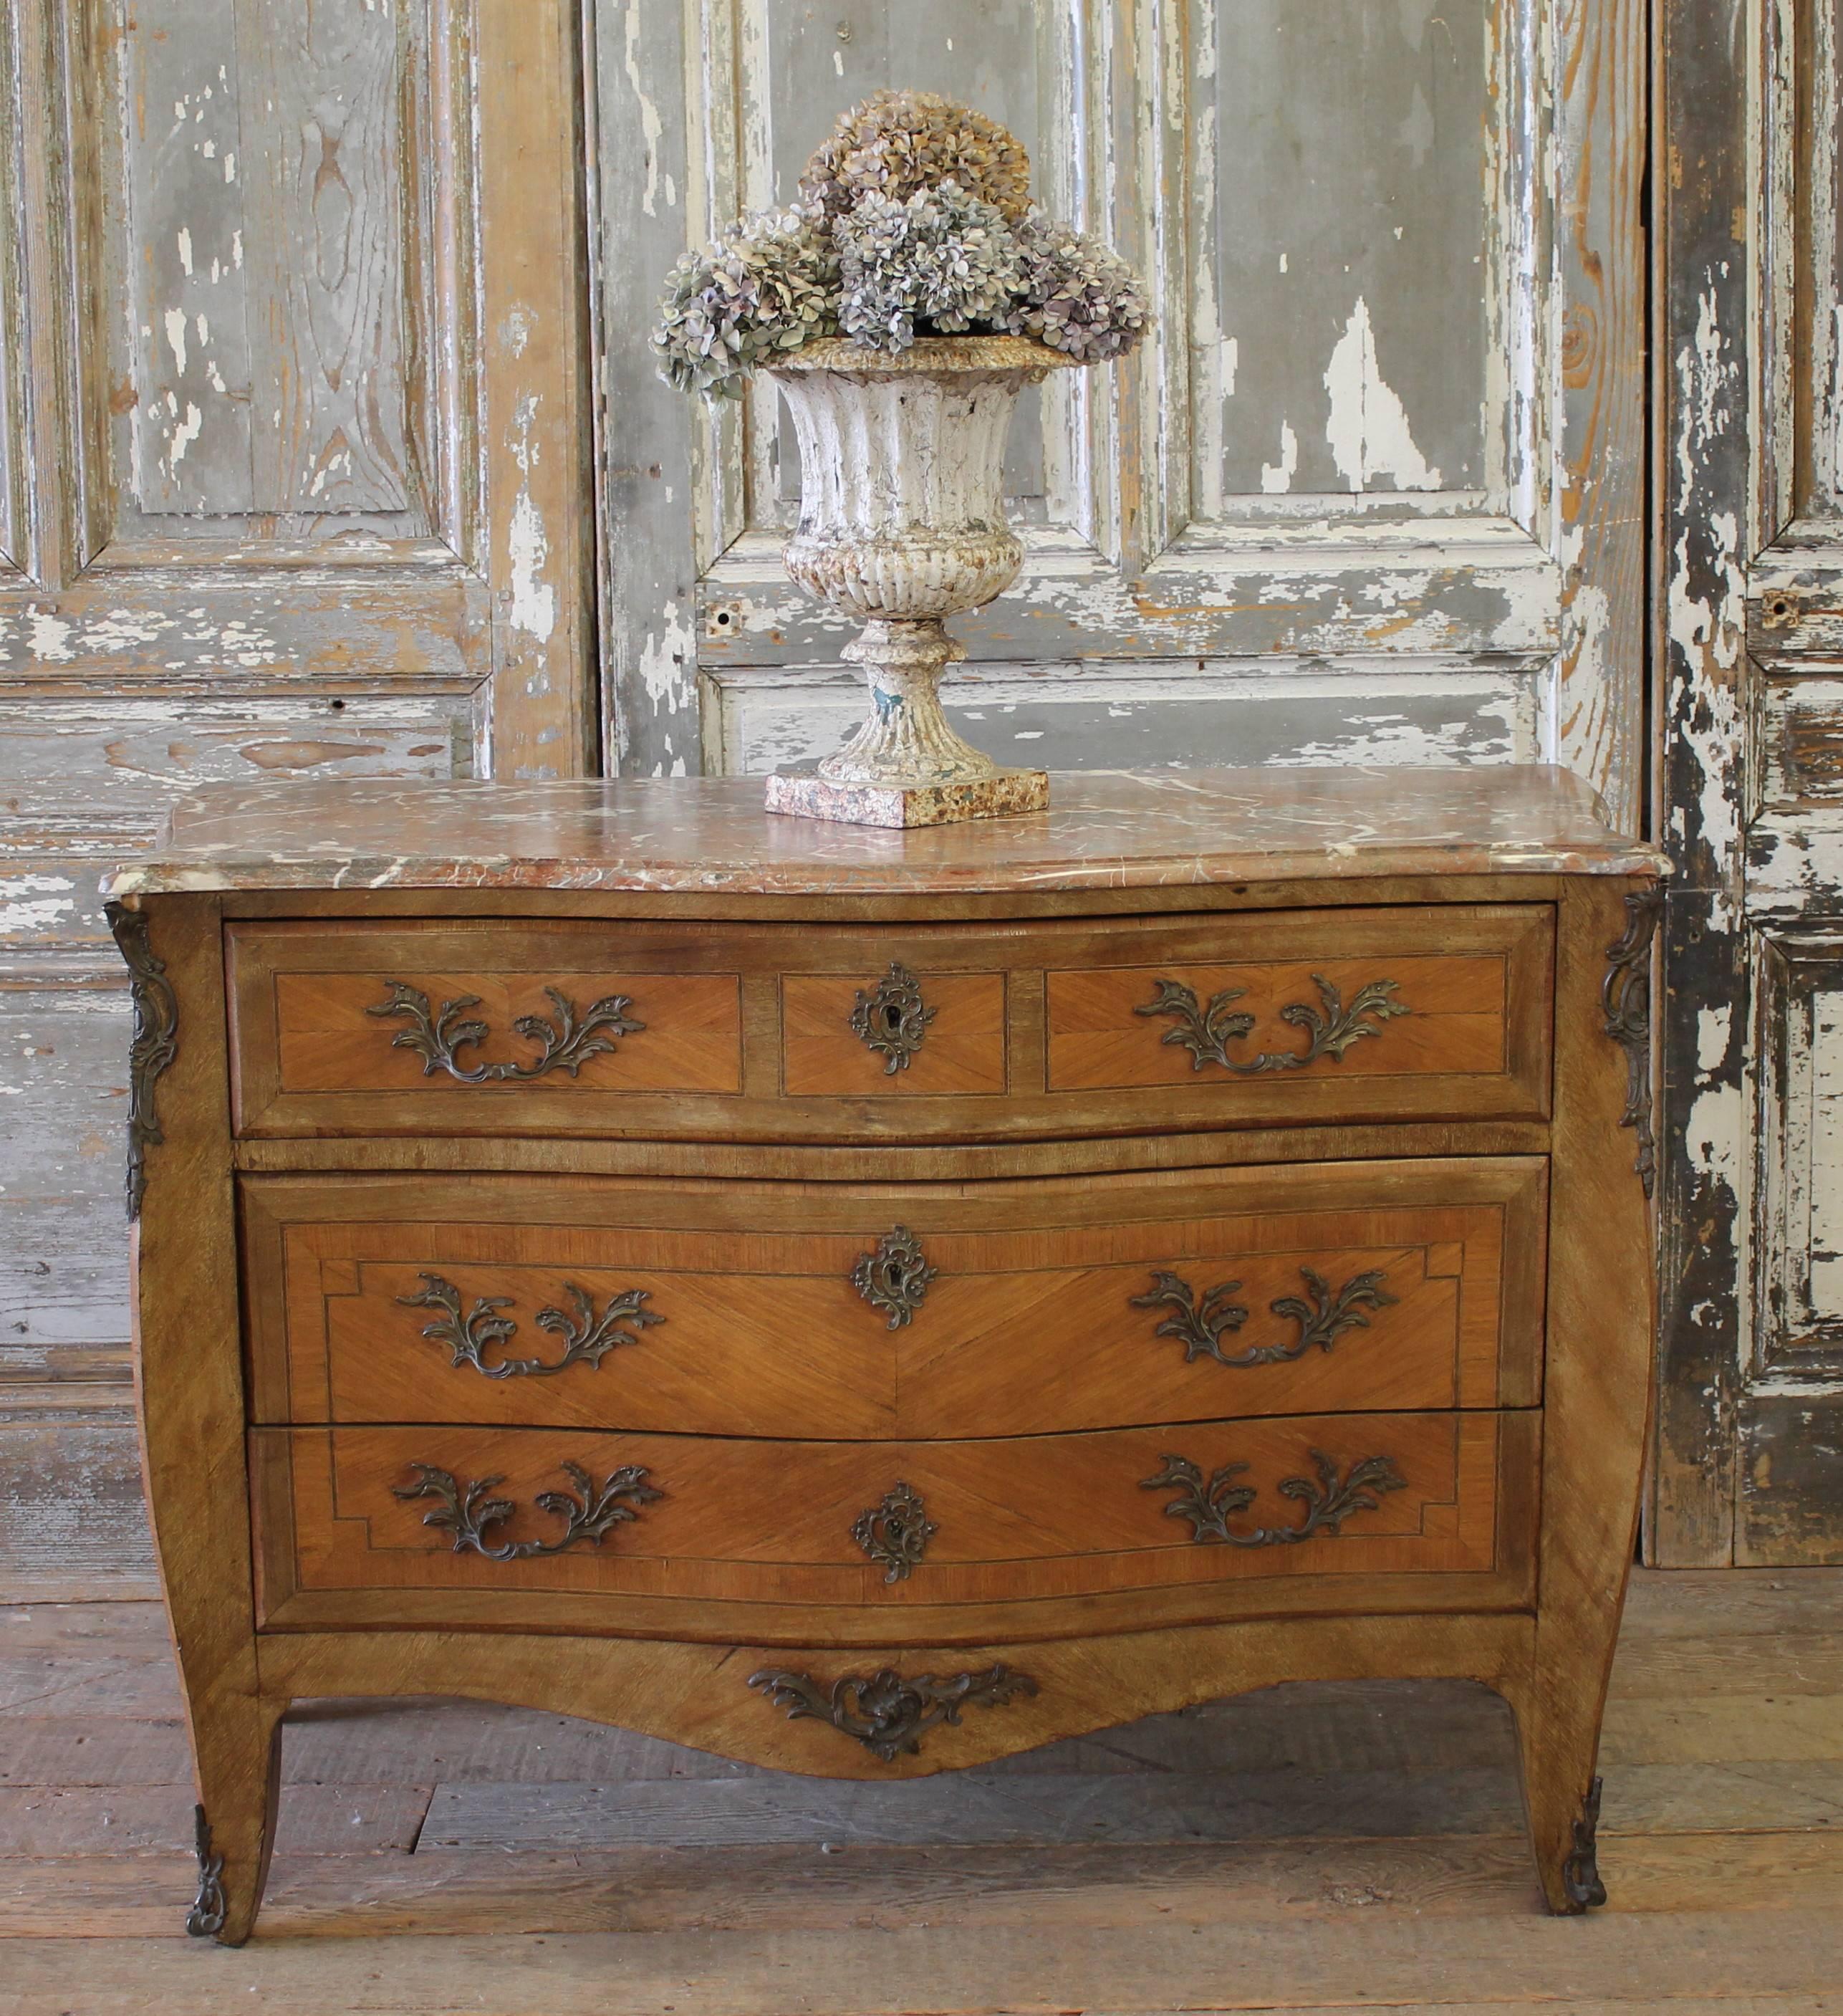 This is a beautiful antique marquetry inlaid serpentine commode, circa 1880. This gorgeous commode has three spacious drawers for ample storage and was inspired by the Louis XV style. 
Kingwood and mahogany, ormolu-mounted bombe commode with a